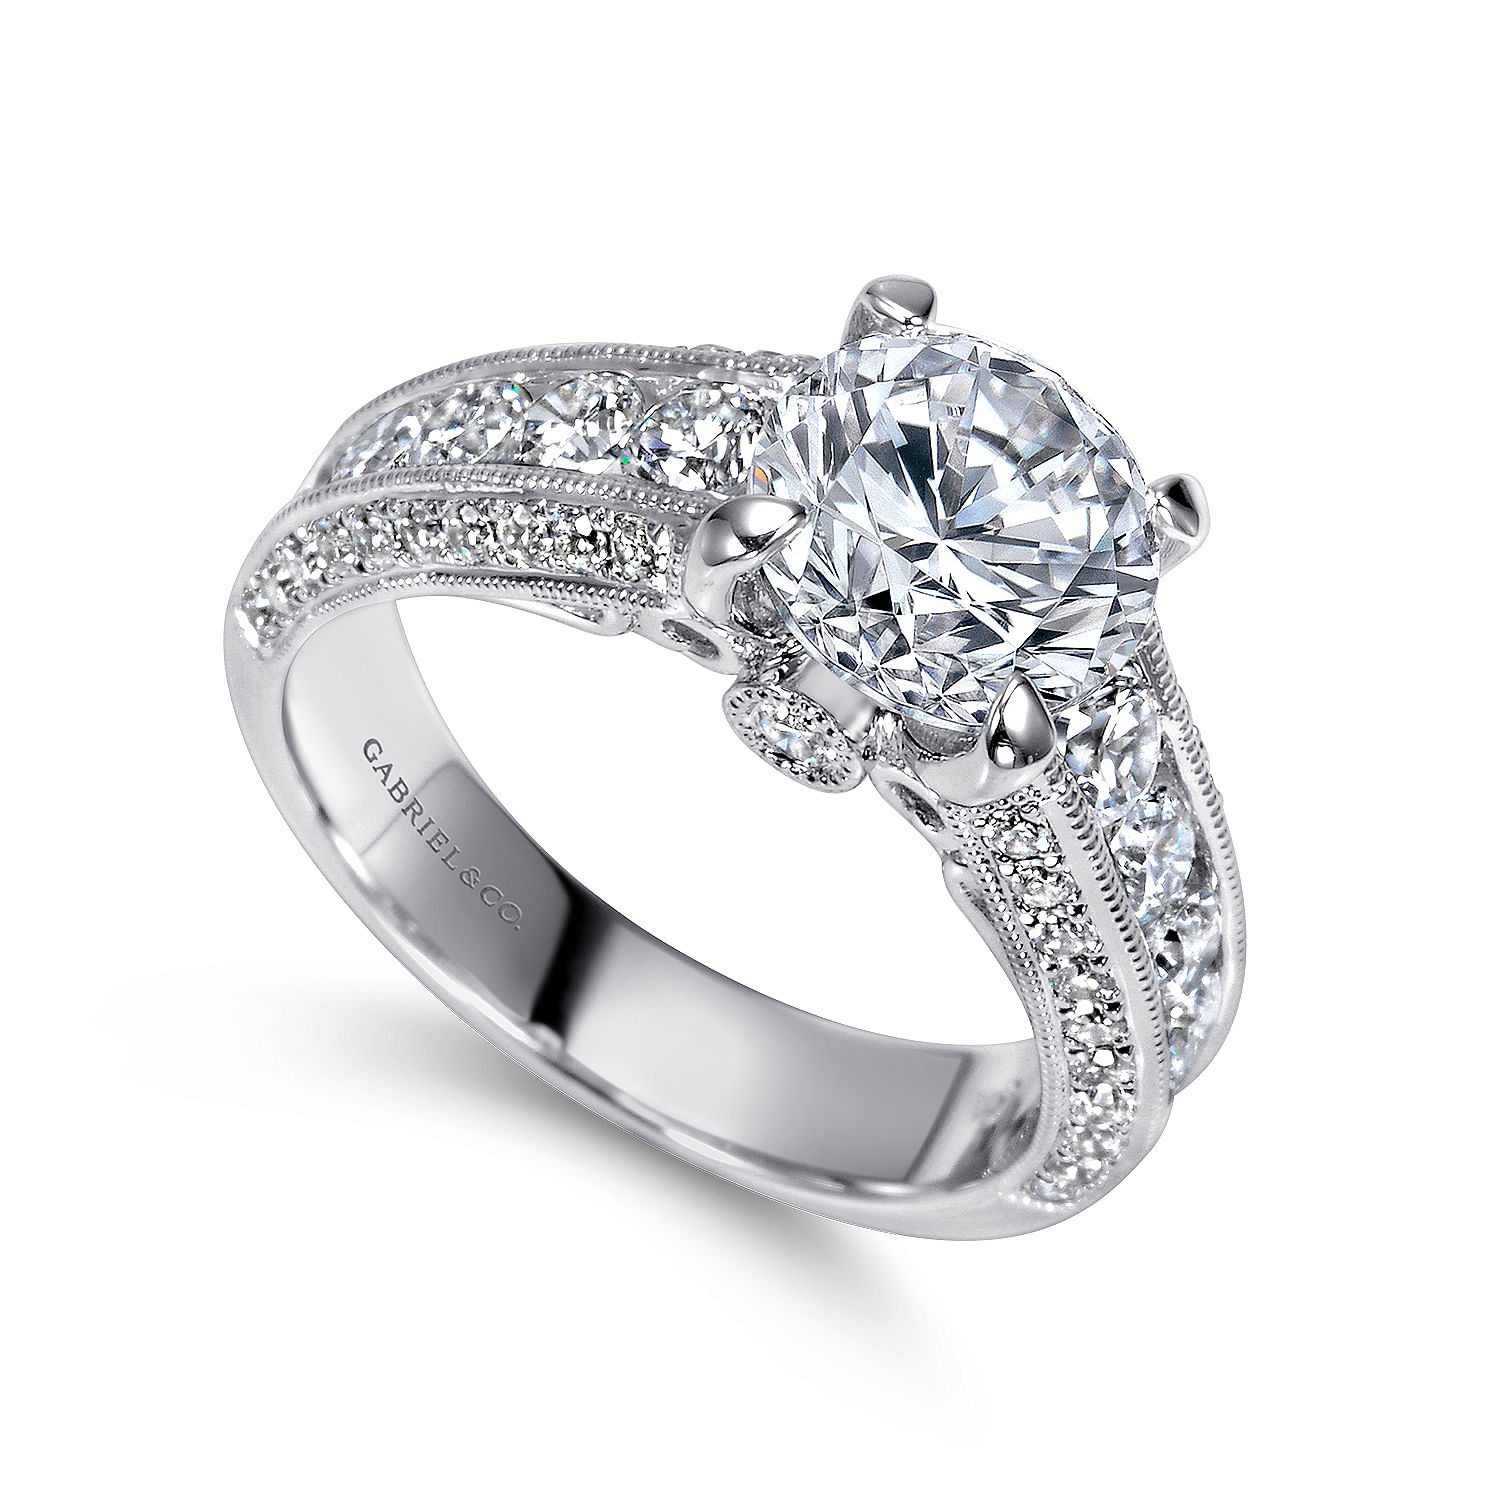 Rebecca - Vintage Inspired 14K White Gold Round Wide Band Diamond Channel Set Engagement Ring - 1.29 ct - Shot 3